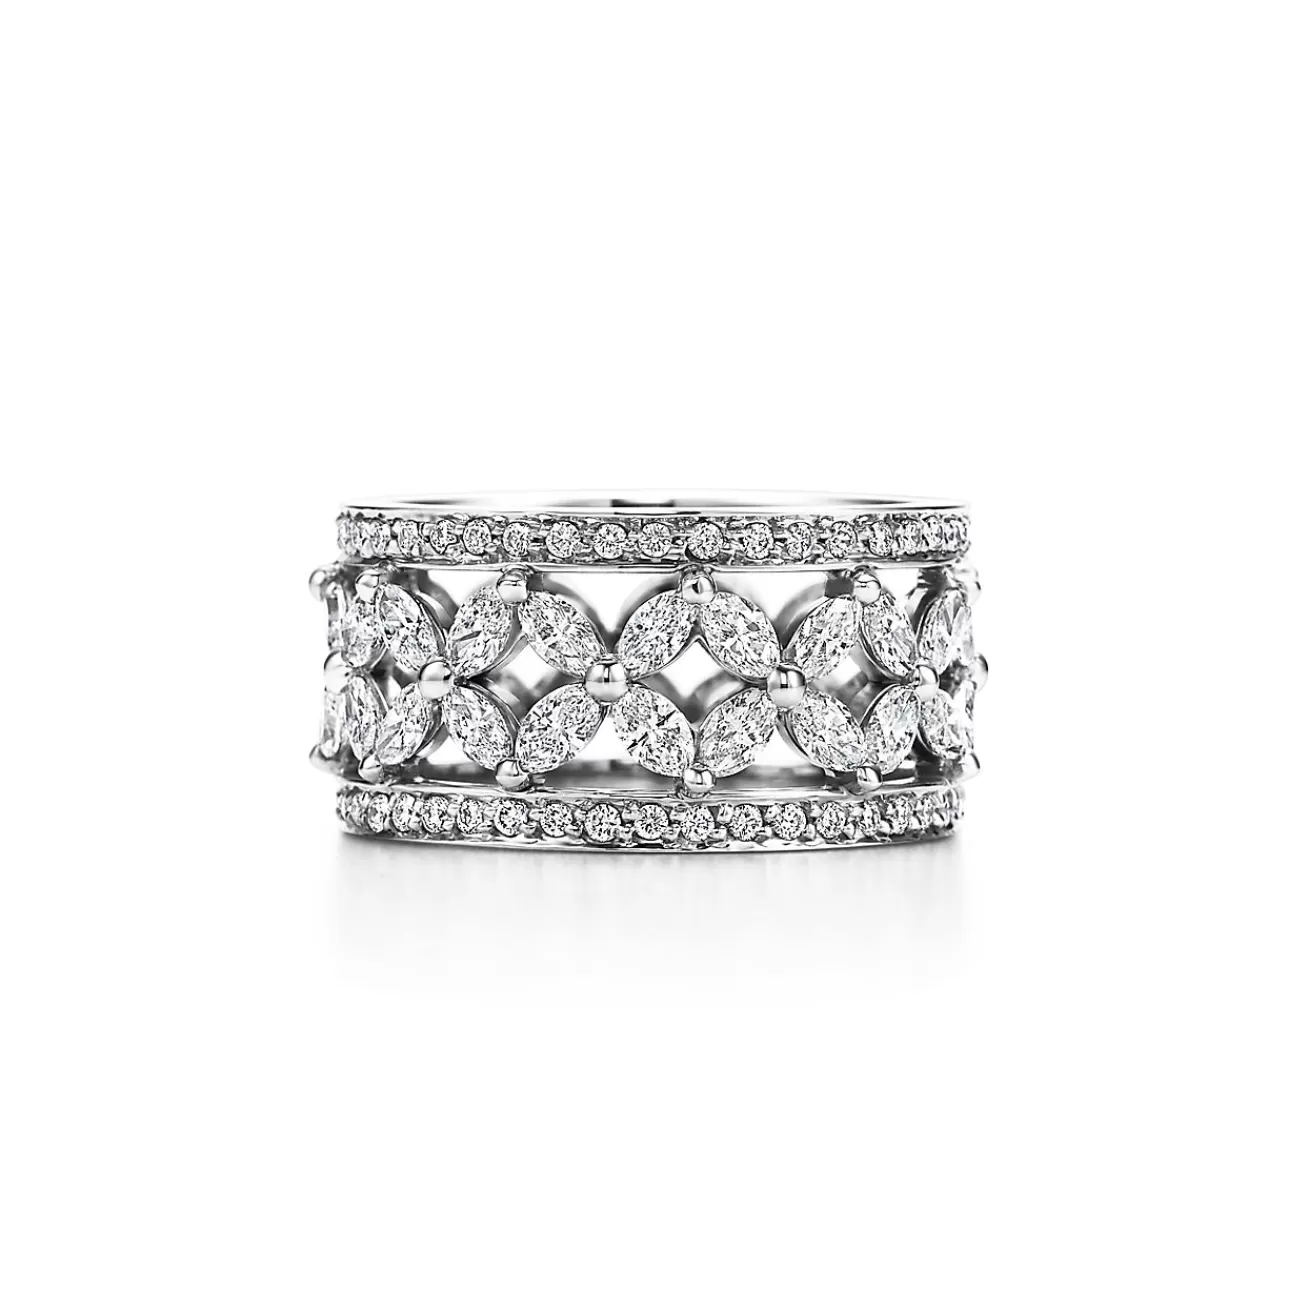 Tiffany & Co. Tiffany Victoria® band ring in platinum with diamonds. | ^ Rings | Platinum Jewelry